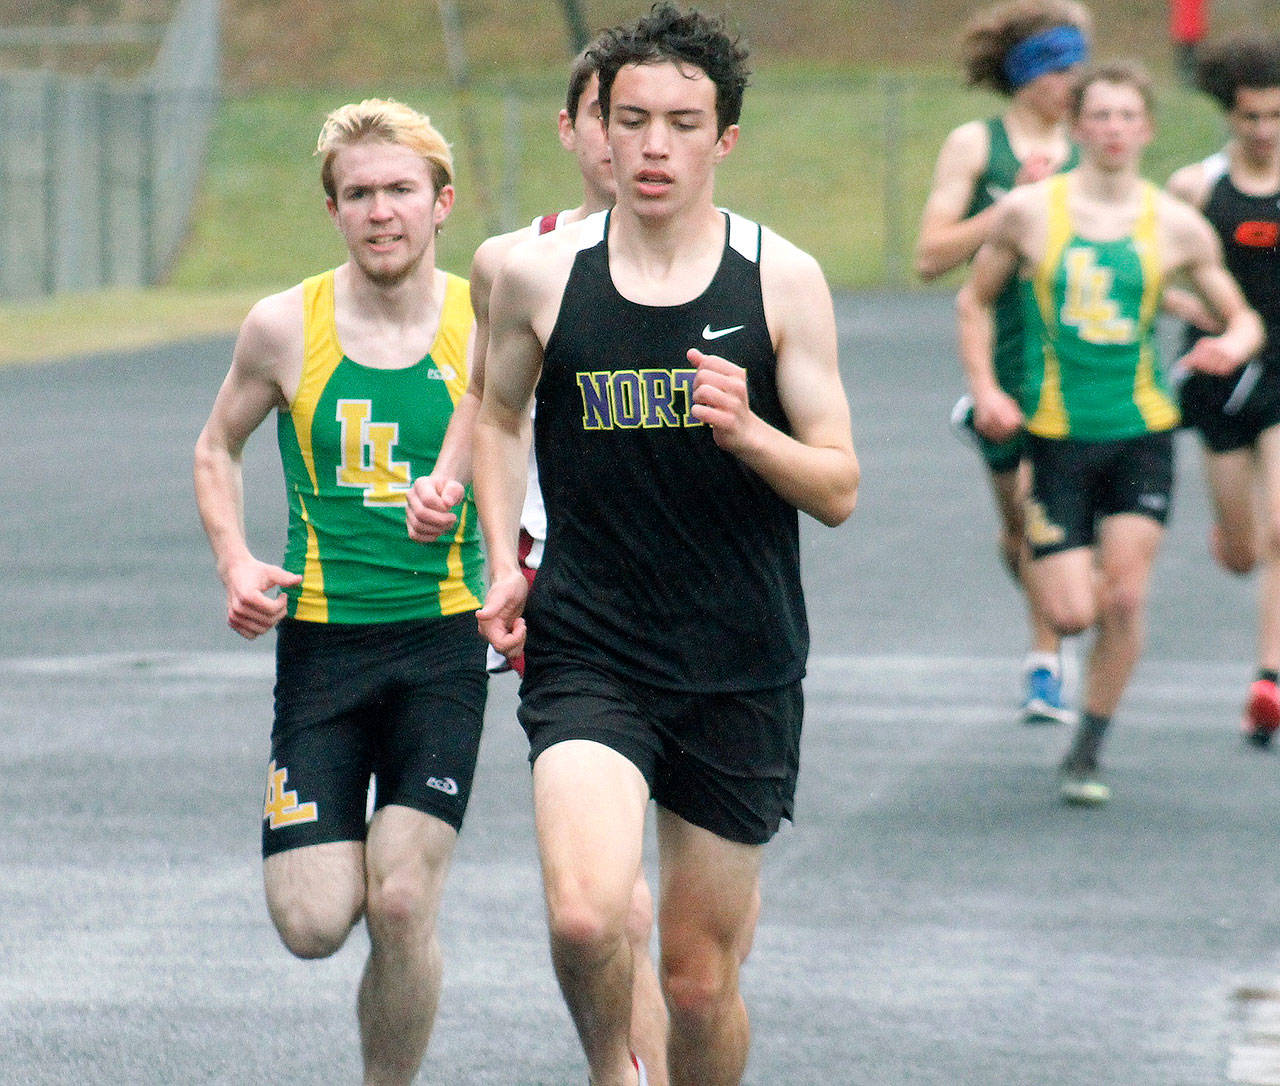 Max Metters of North Kitsap leads the pack in the 1600-meter run. (Mark Krulish/Kitsap News Group)